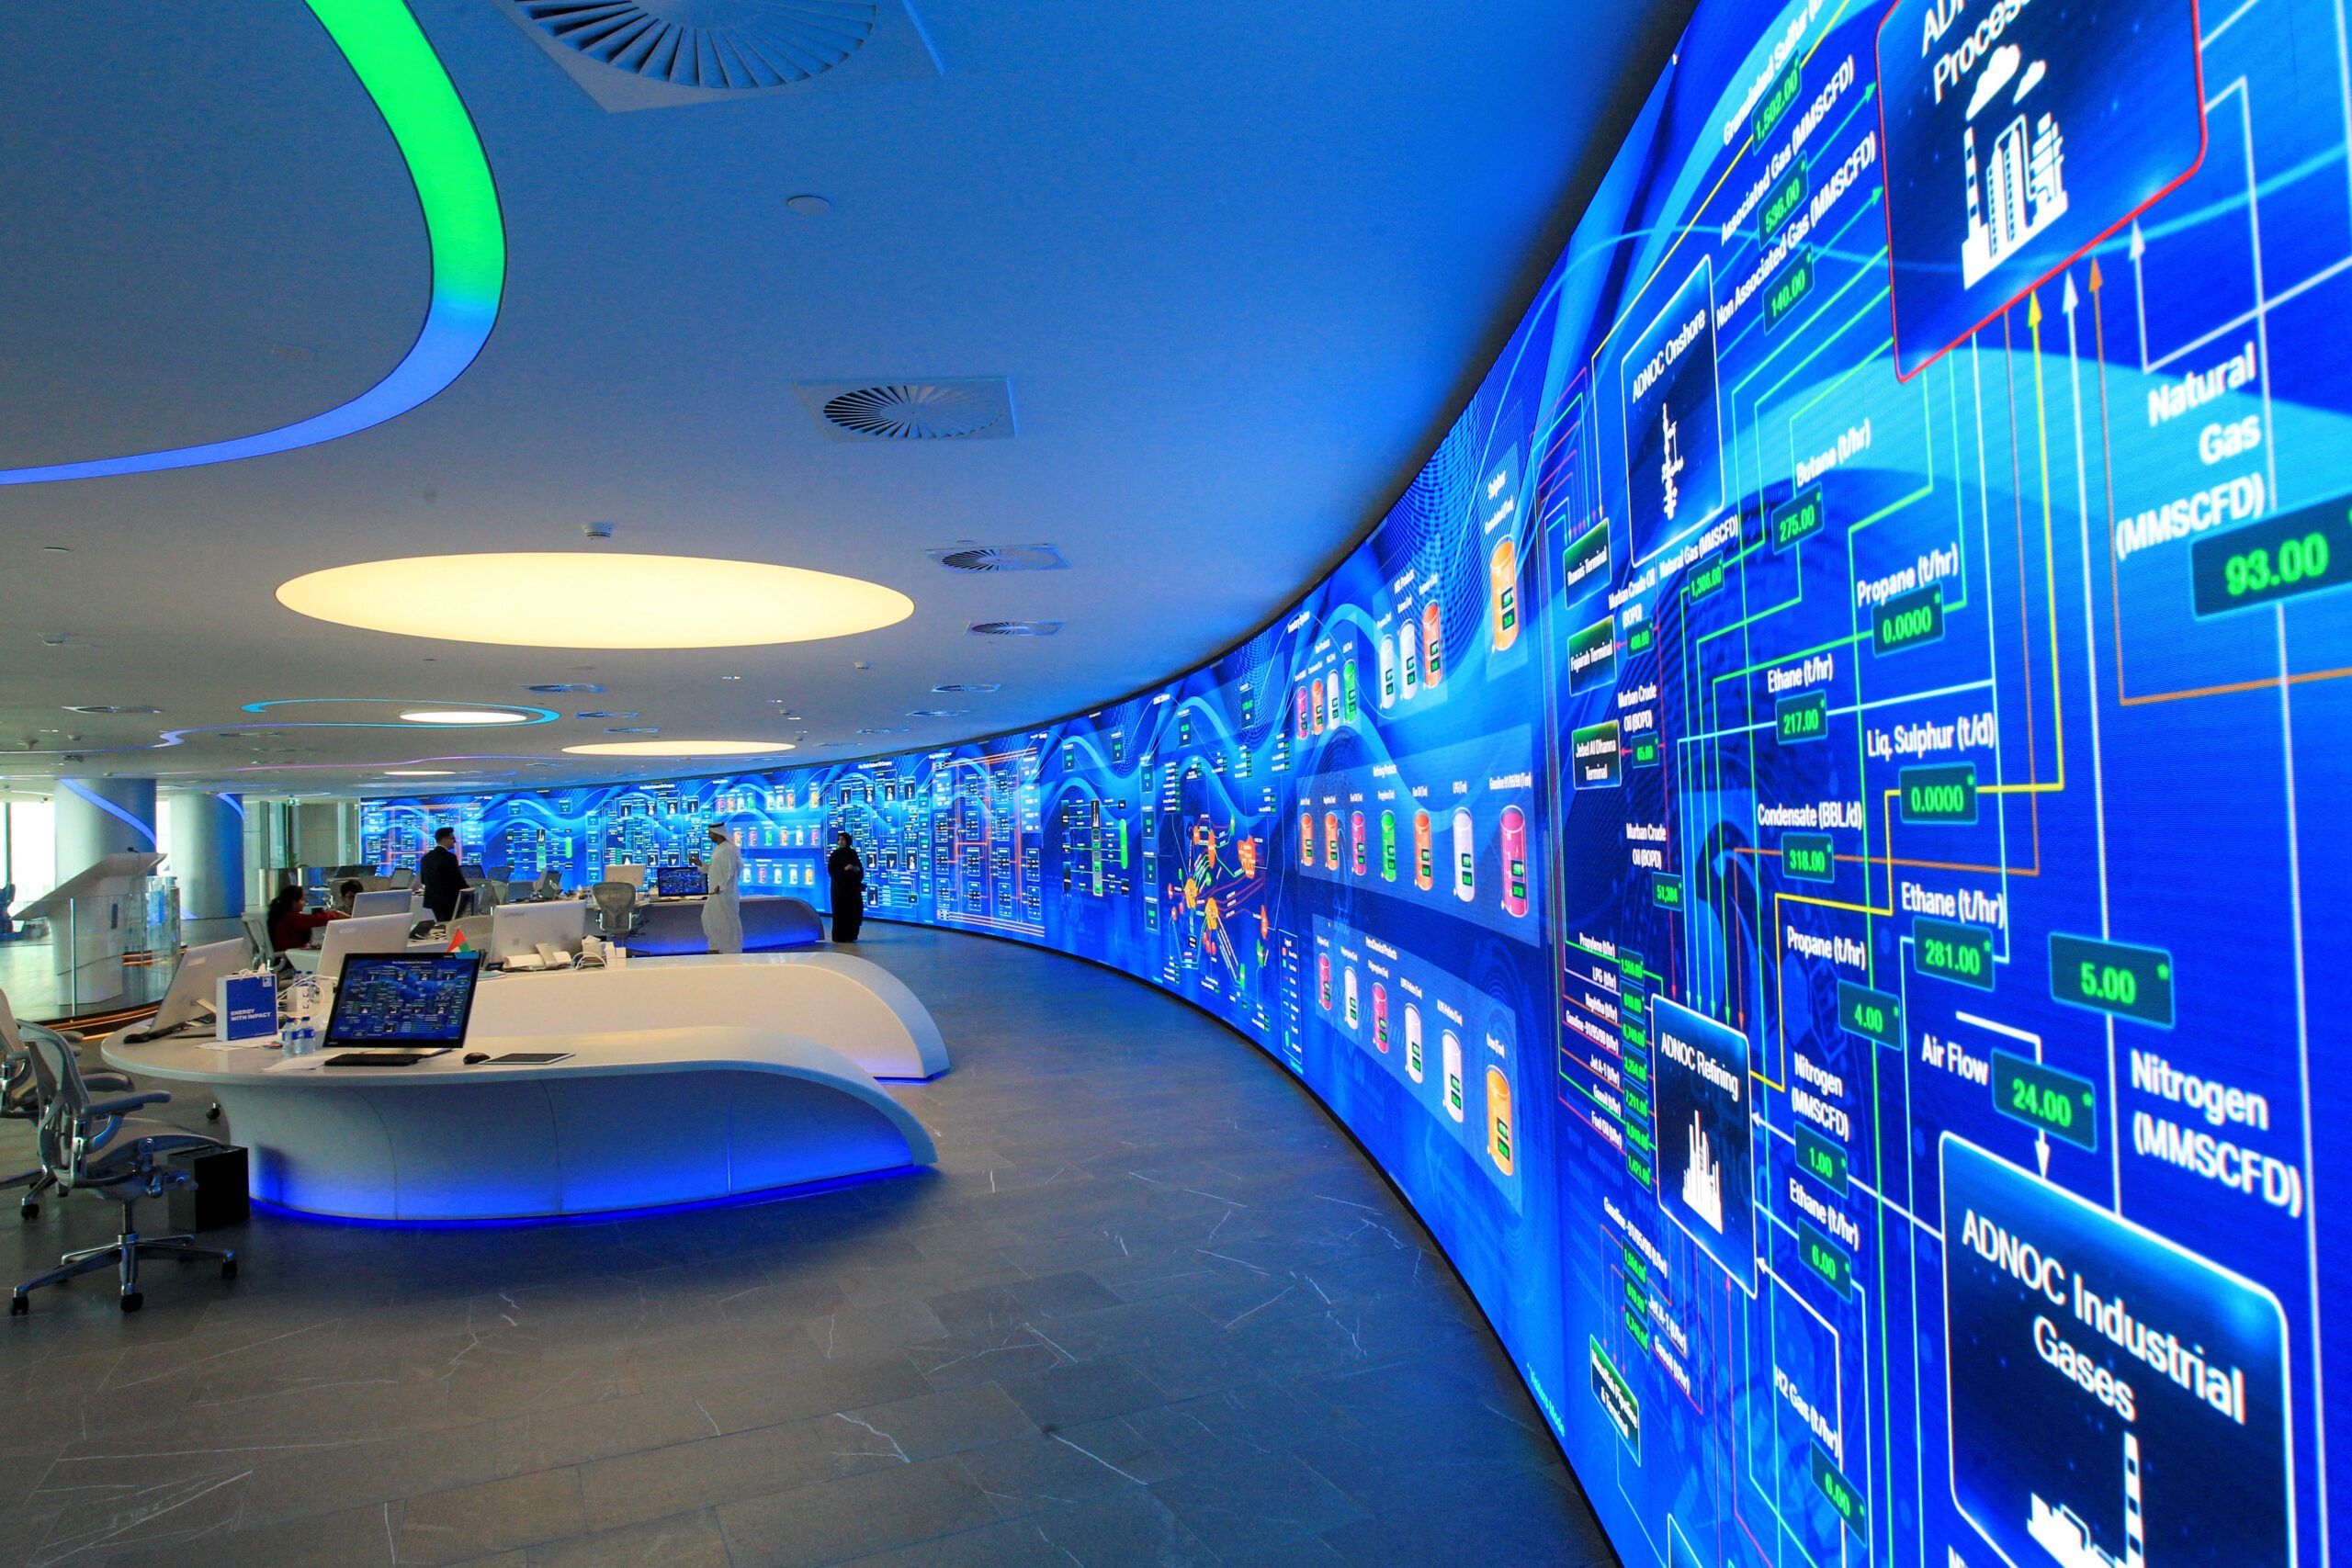 A view of the 'command centre' at Adnoc headquarters. Adnoc L&S serves more than 100 customers worldwide, including Adnoc